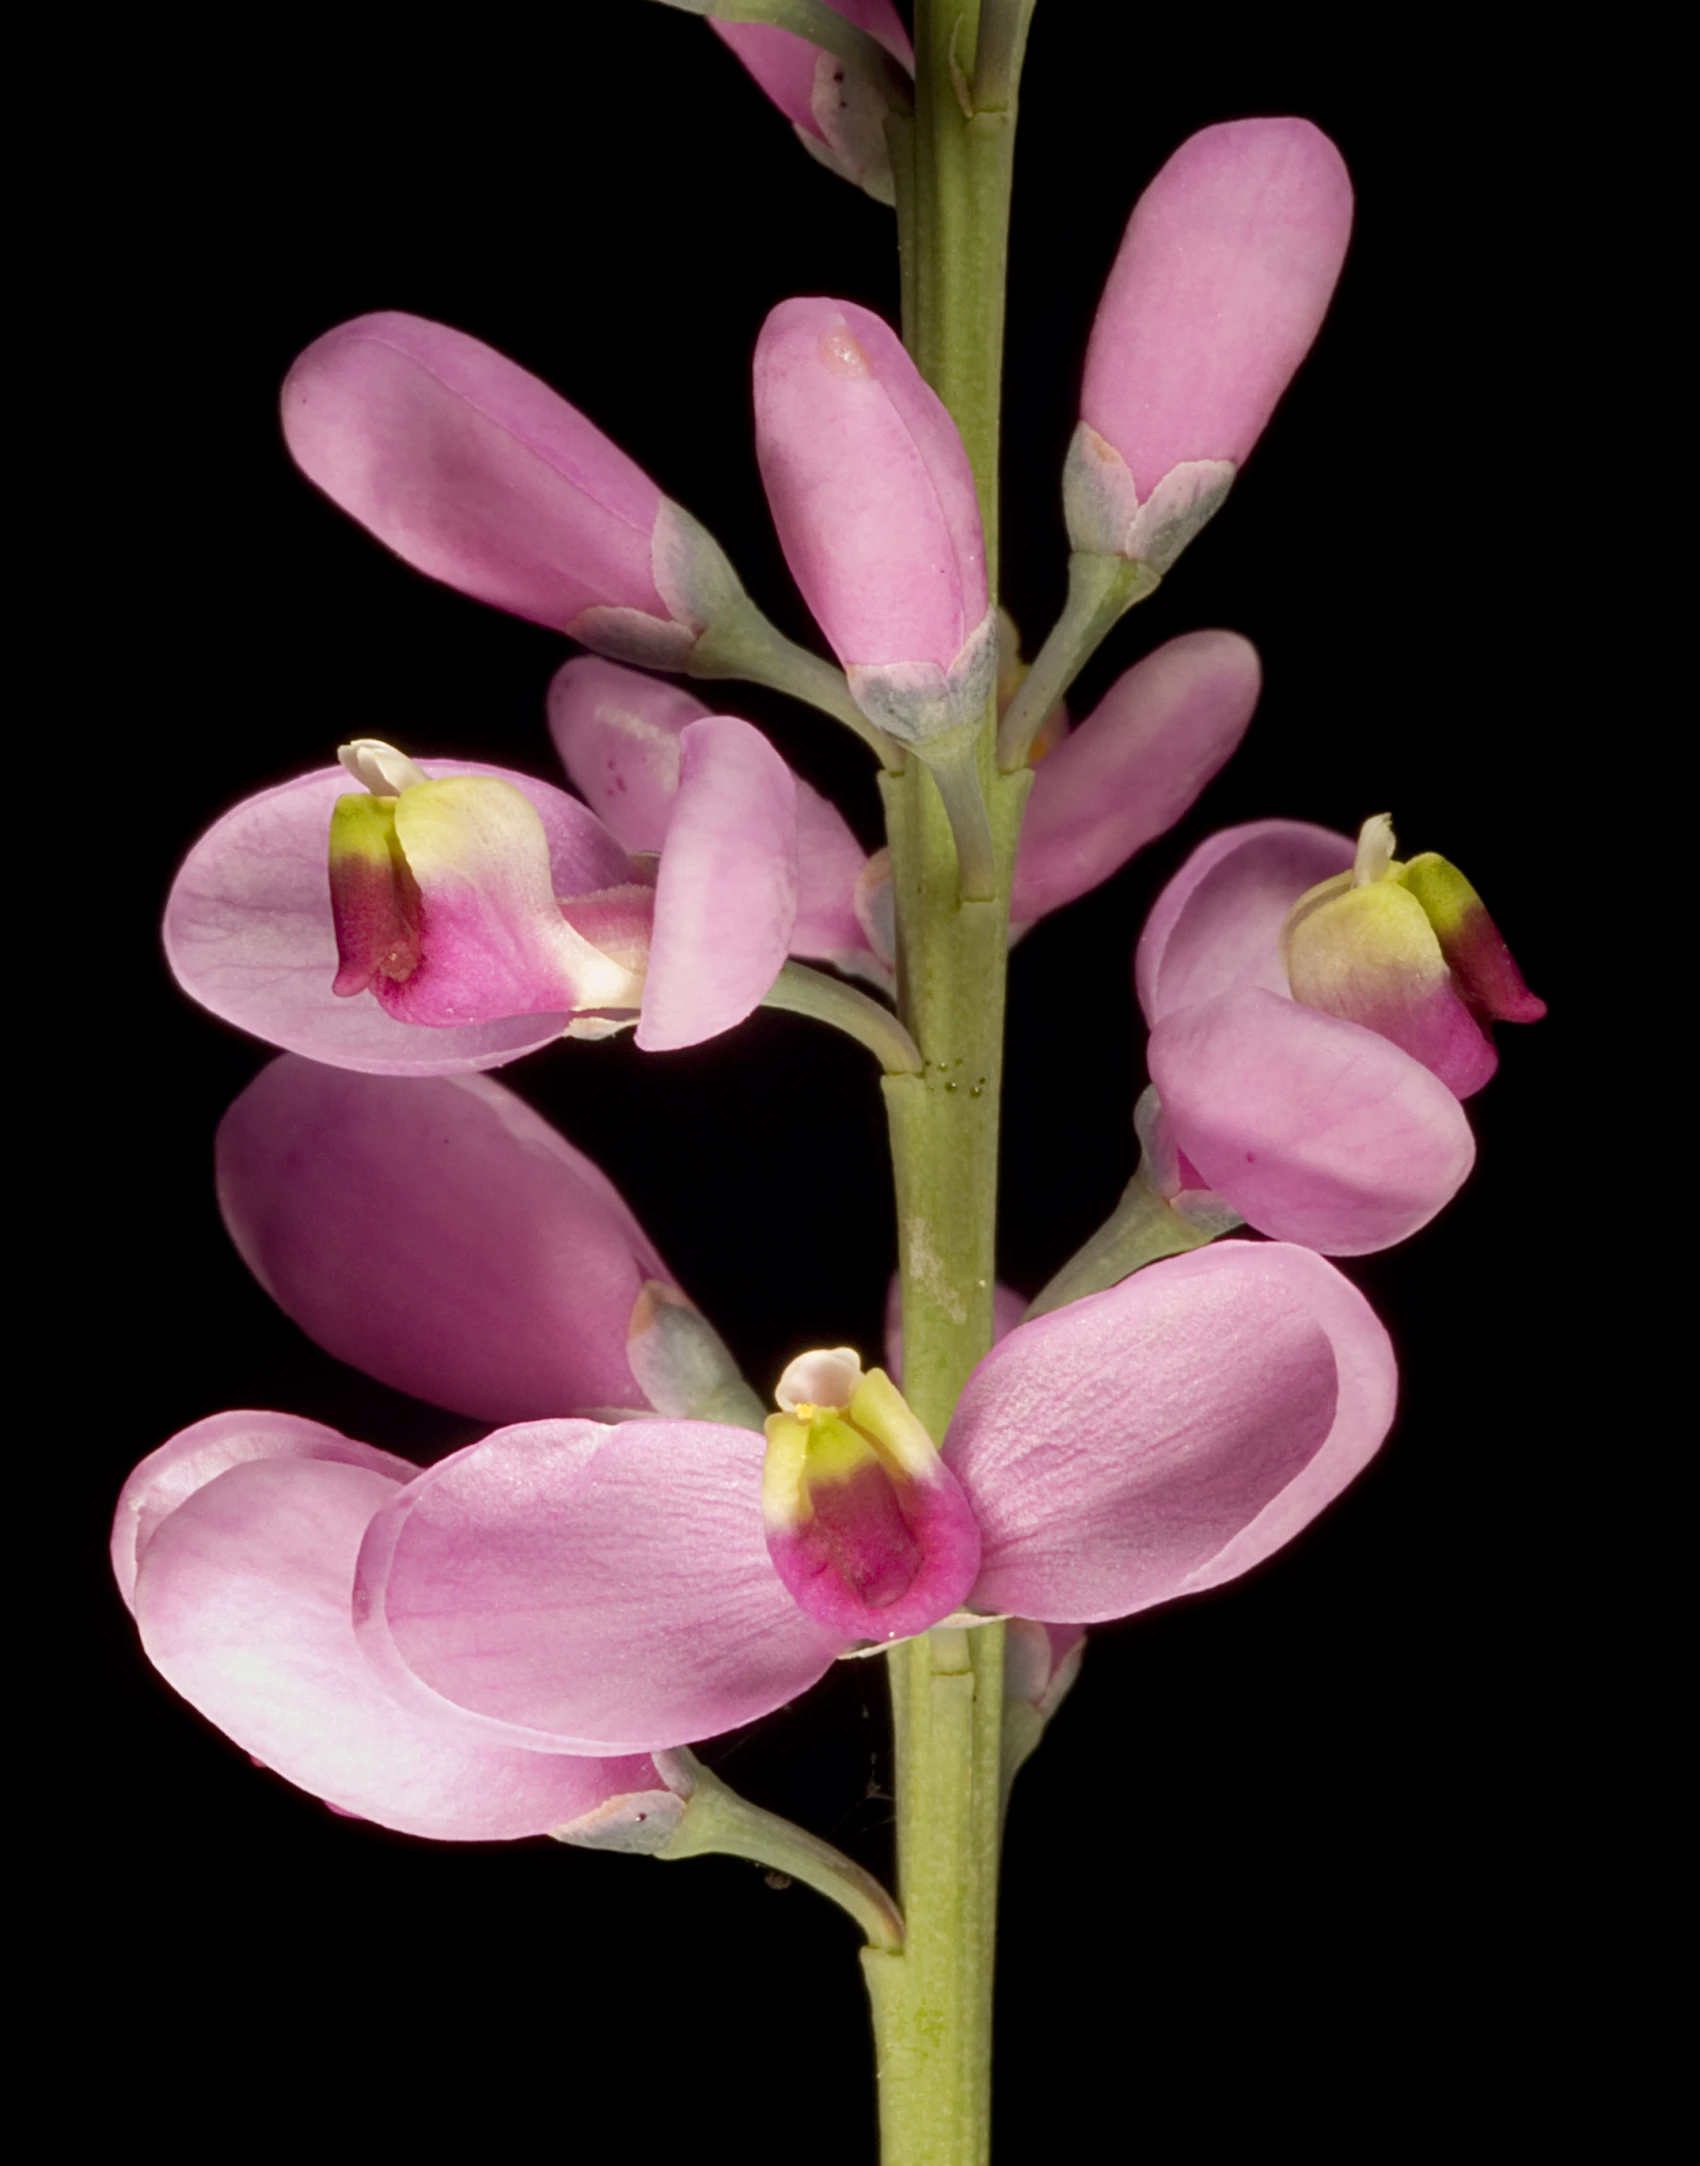 a pink flower with long stem standing up